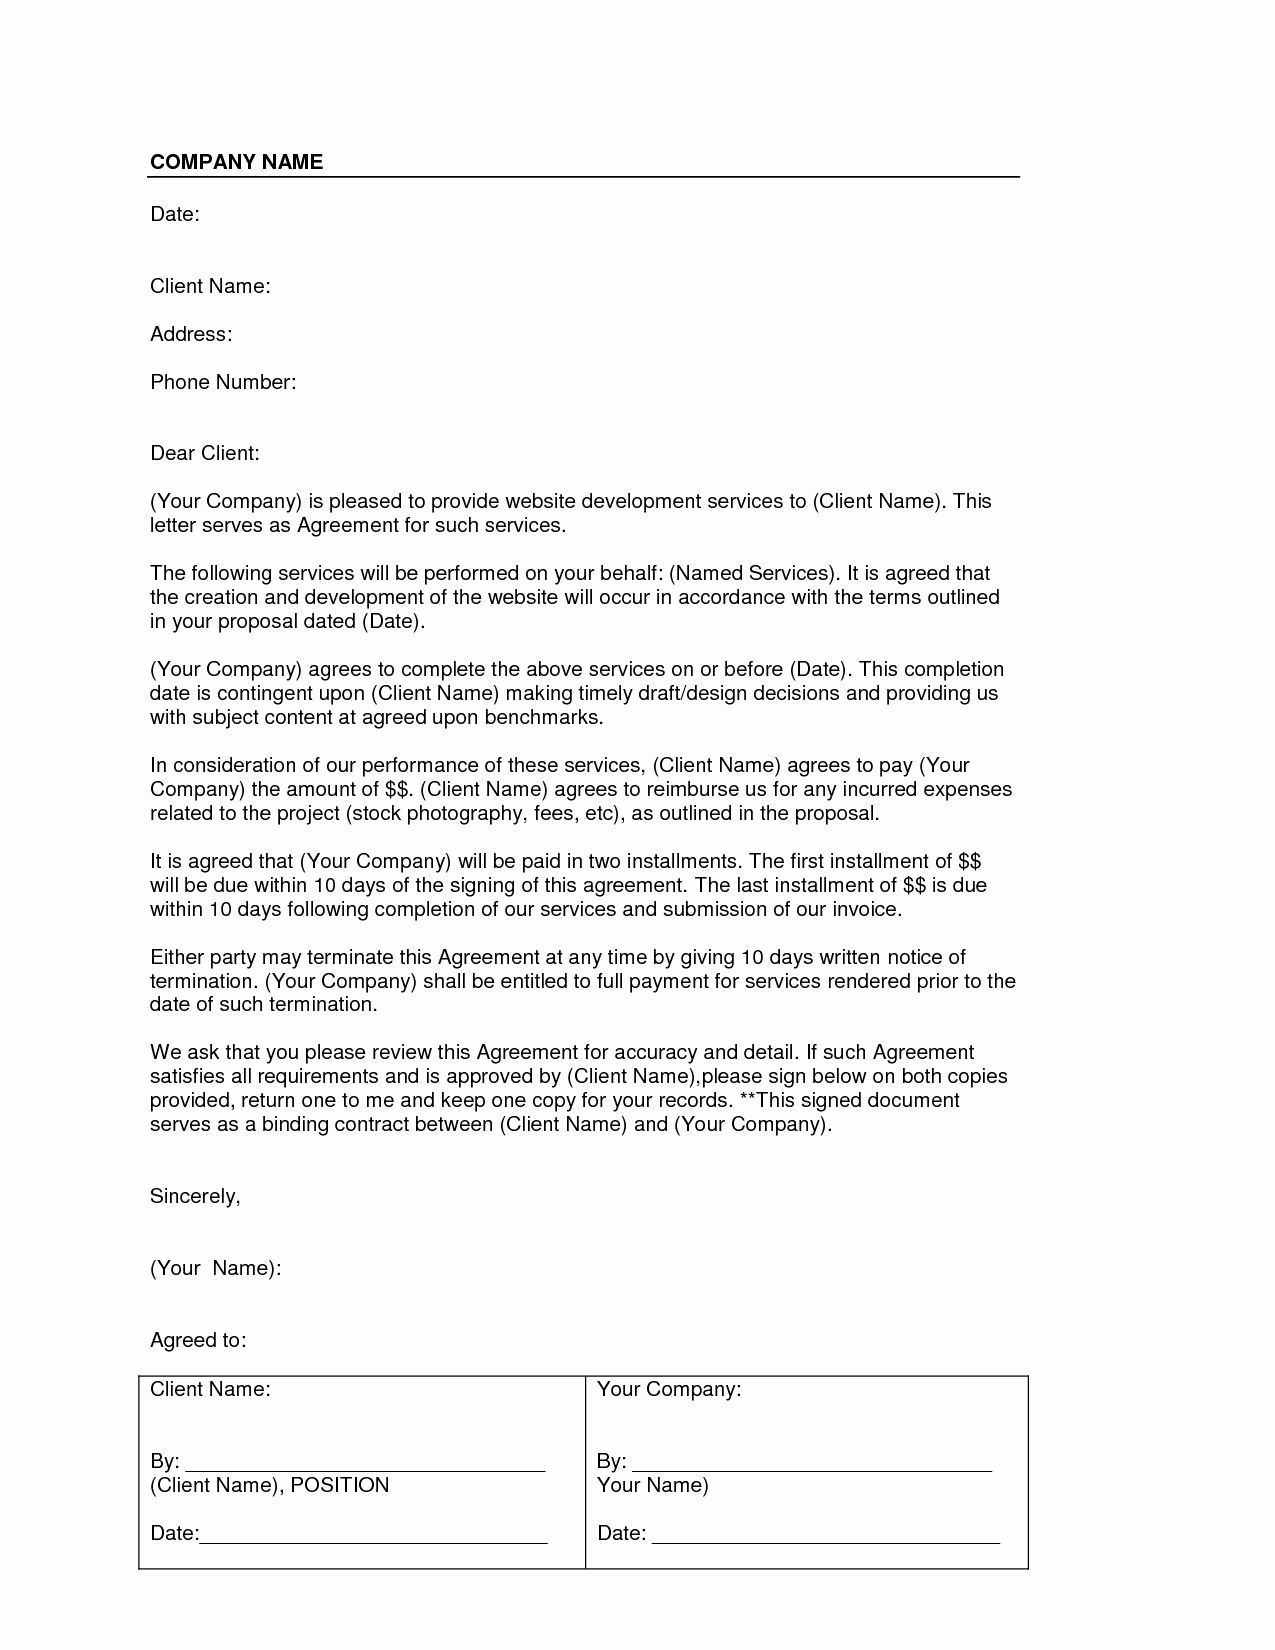 Letters Of Agreement Templates Awesome Free Printable Letter Of Agreement form Generic